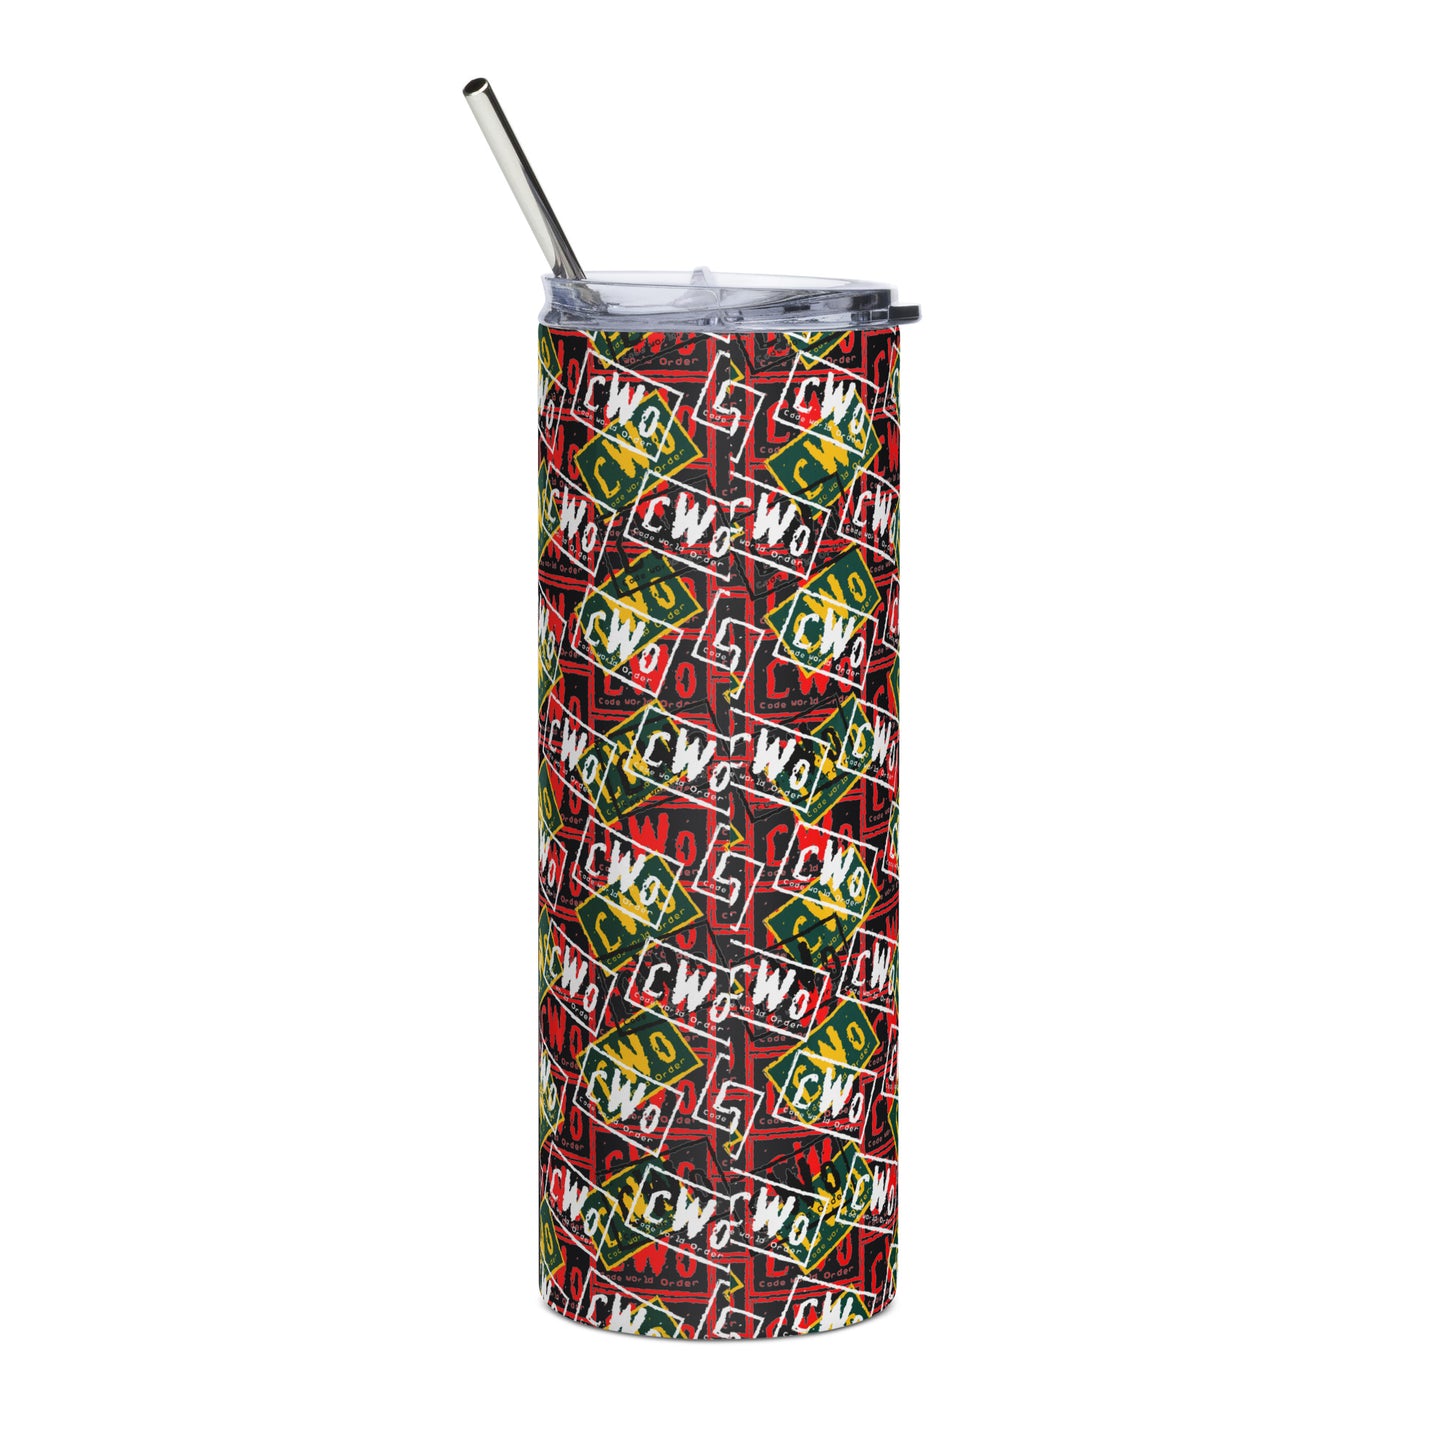 Crazy Sticker CWO Stainless Steel Tumbler